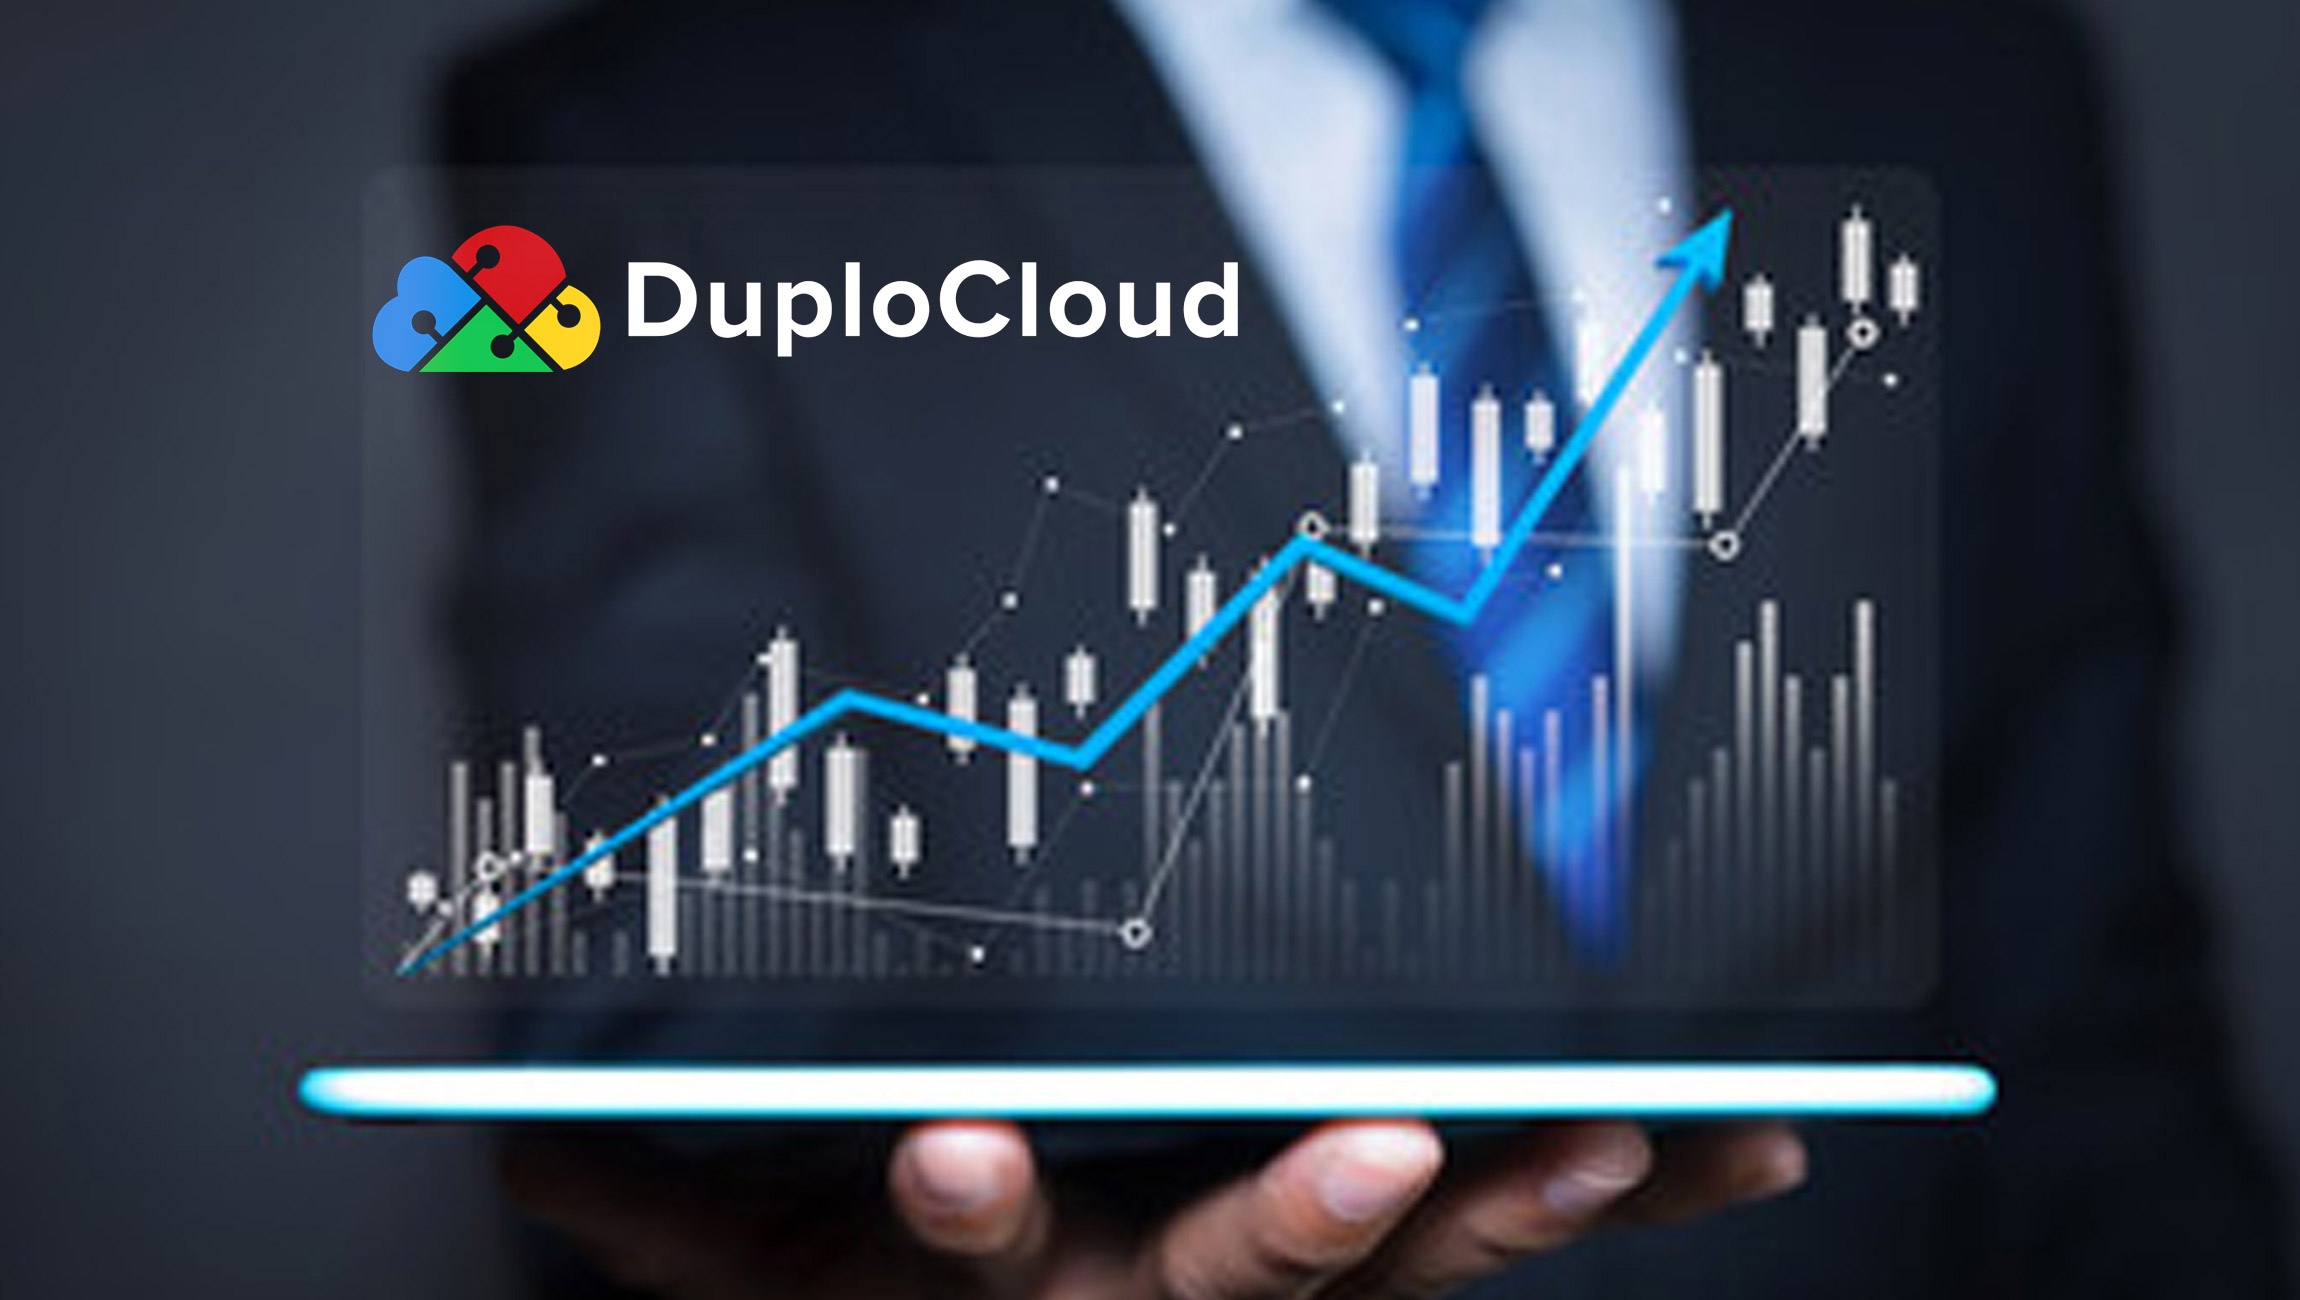 DevOps-as-a-Service-Pioneer-DuploCloud-Raises-_15-Million-Series-A_-Experiences-270%-Year-over-Year-Revenue-Growth